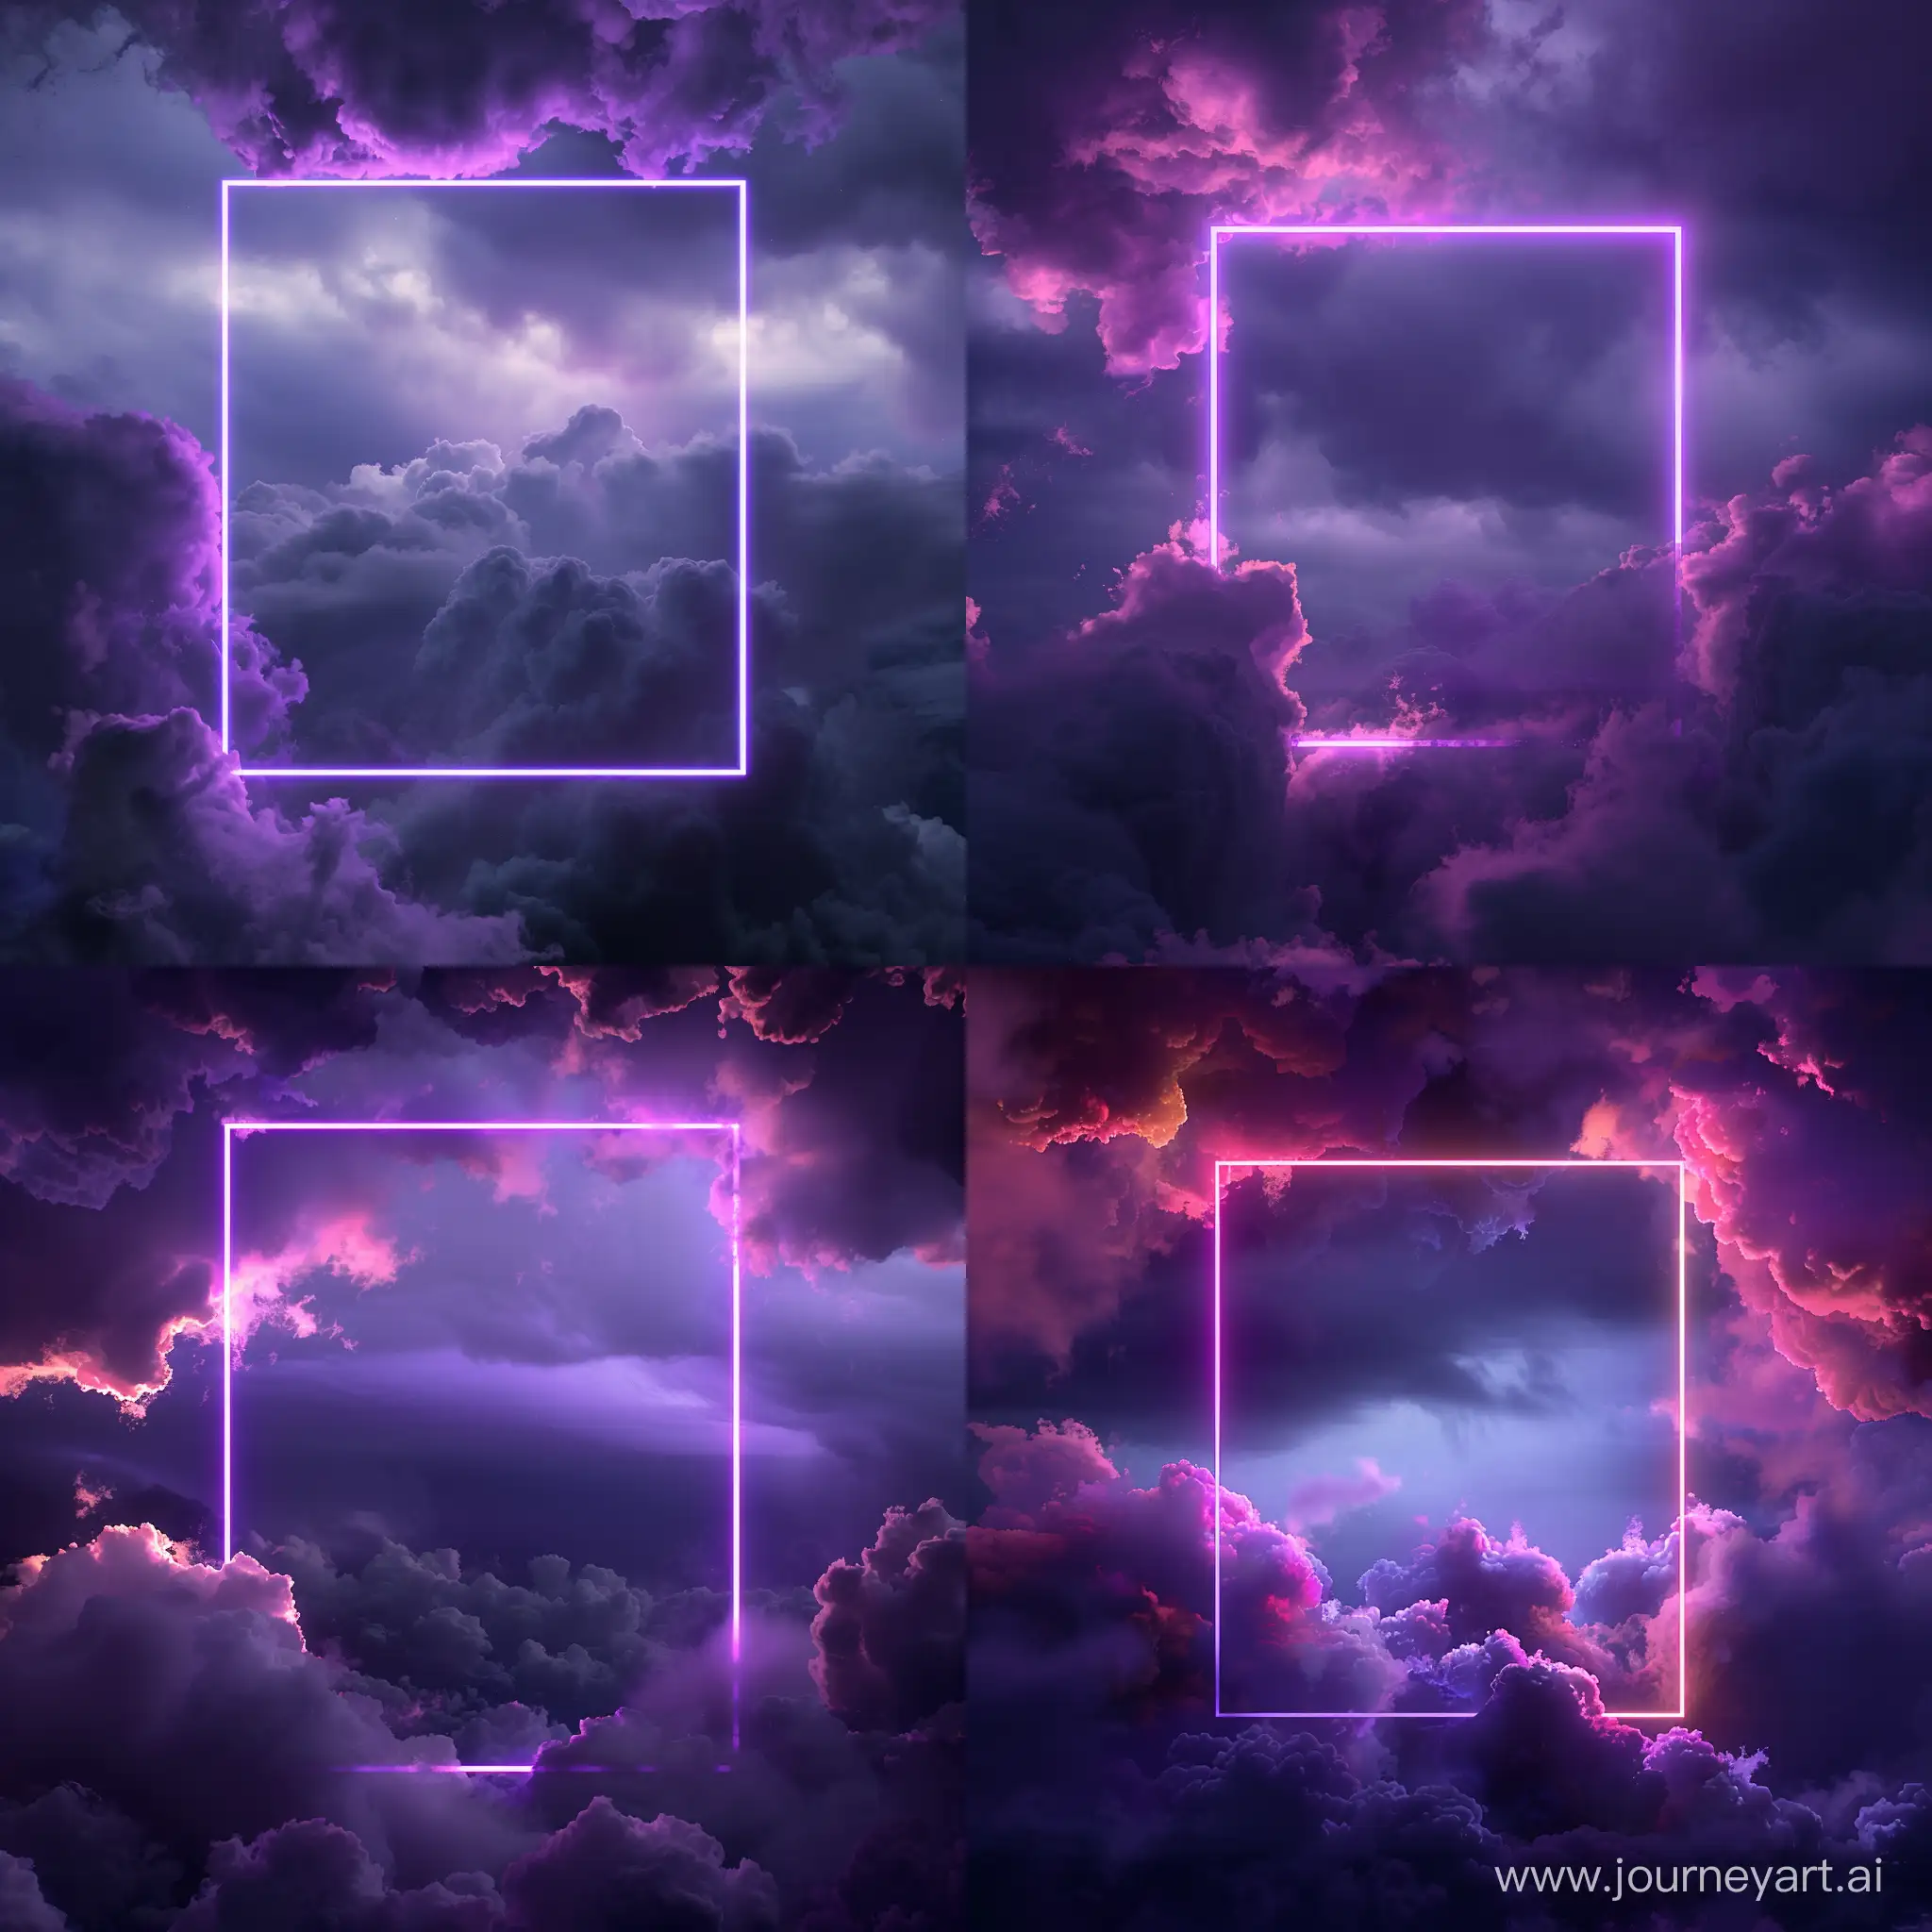 Dreamy-Neon-Purple-Sky-with-Realistic-Cloud-Reflections-at-Night